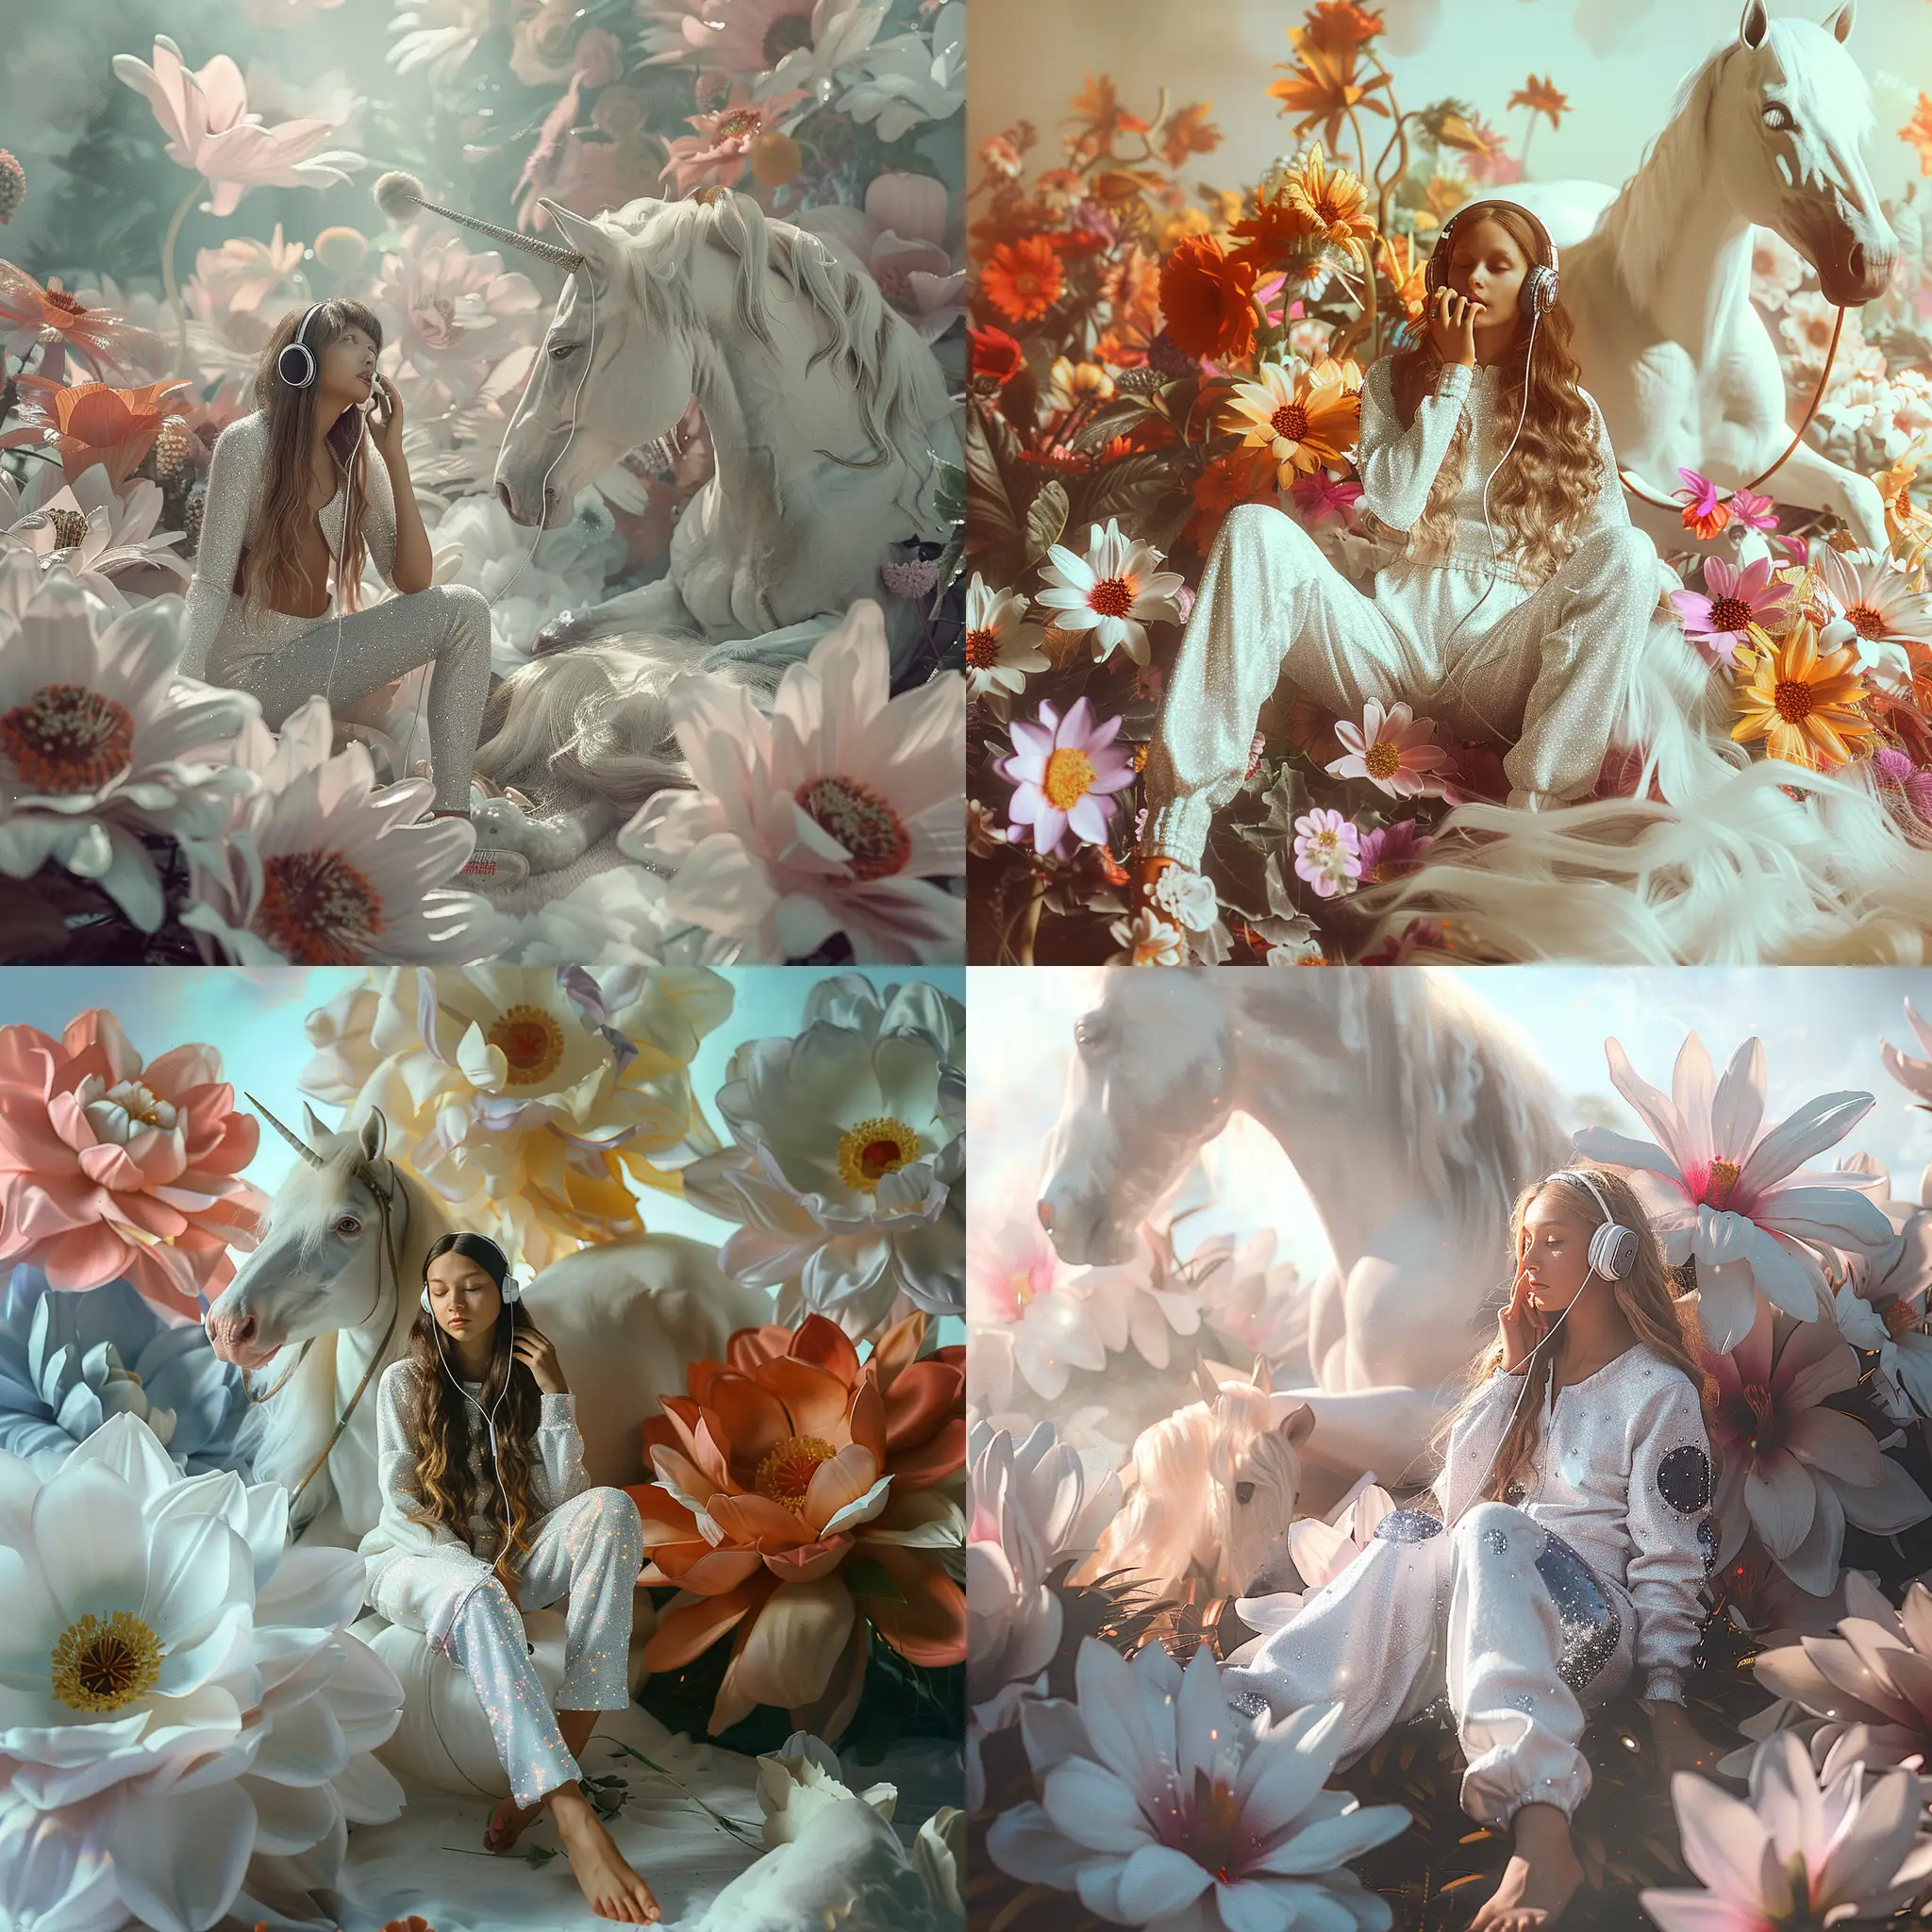 Girl-in-Cosmic-Jumpsuit-Relaxing-on-Giant-Flowers-with-White-Horse